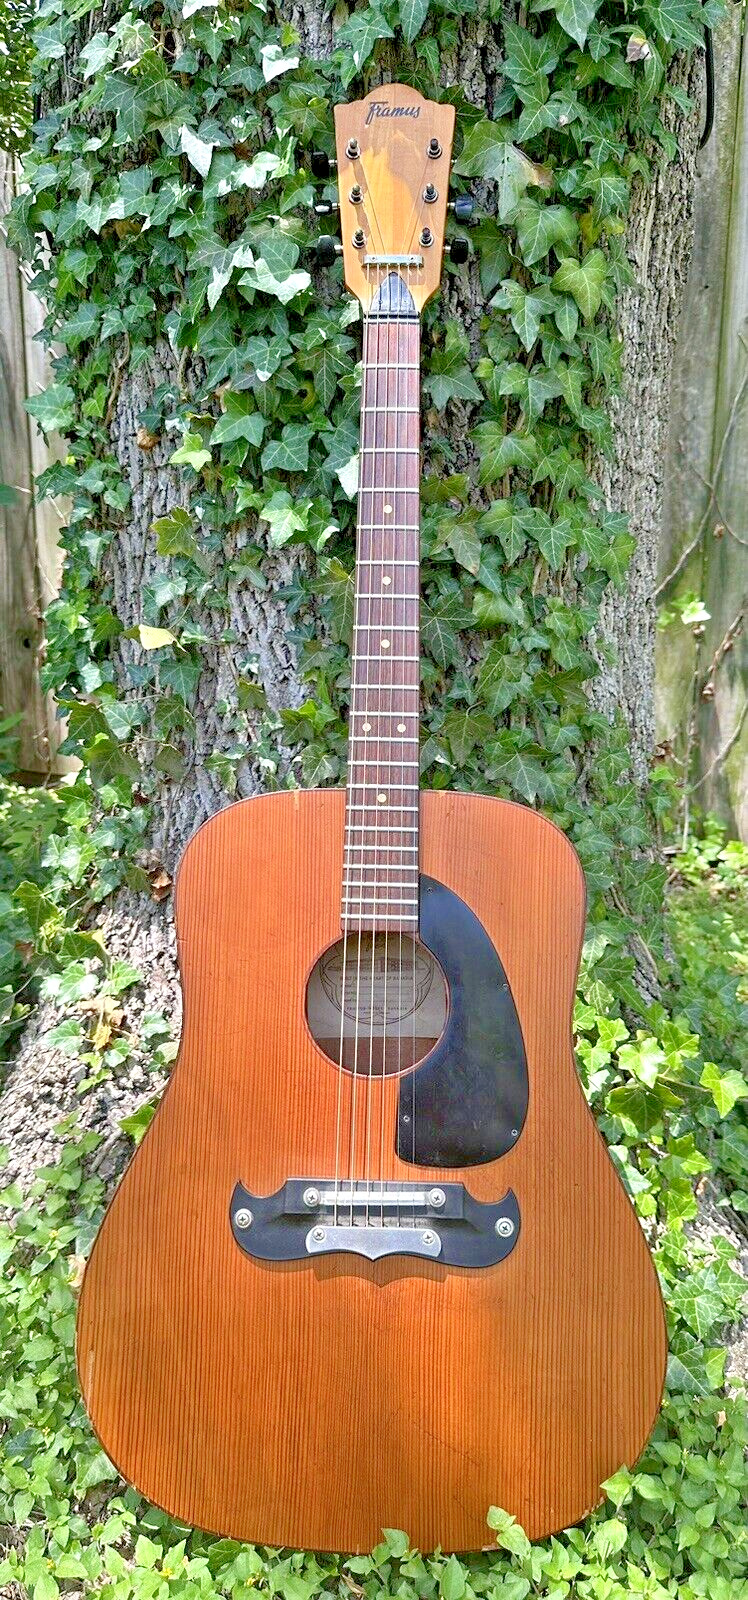 Framus Dix J 196 Acoustic Guitar - Vintage - 1970’s - Made in Germany - Country